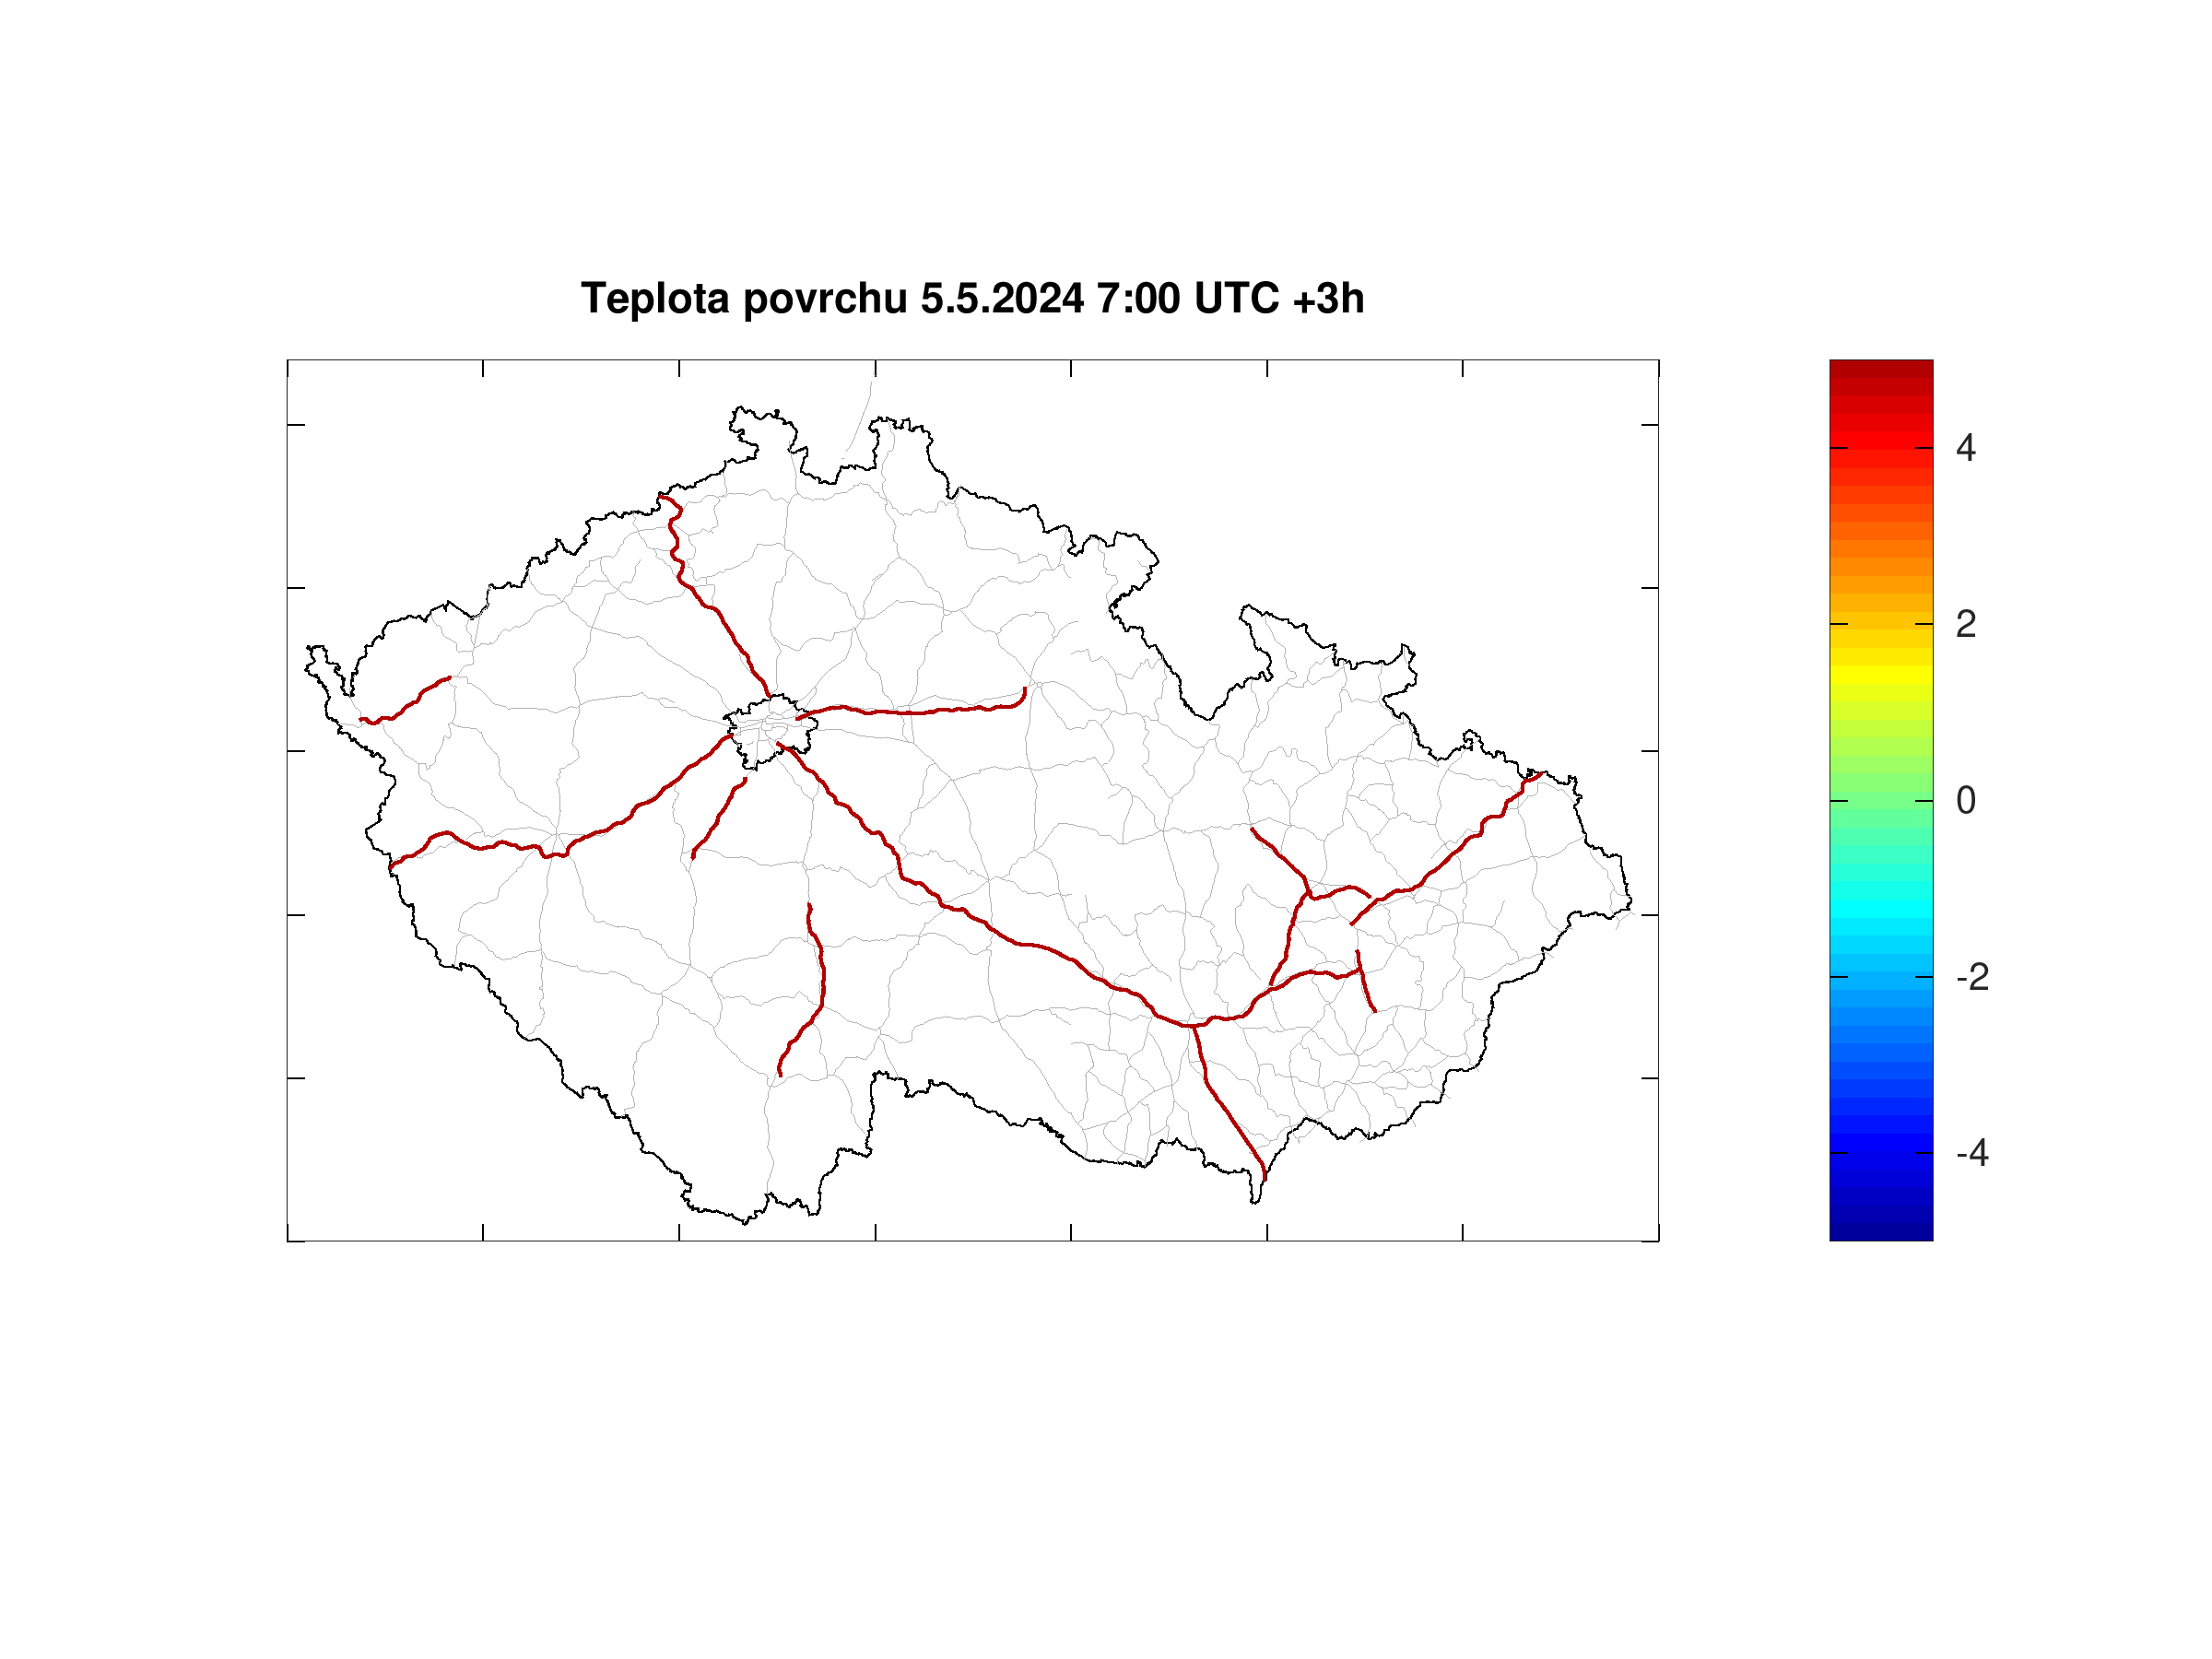 Road surface teperature forecast for Czech highways +3h